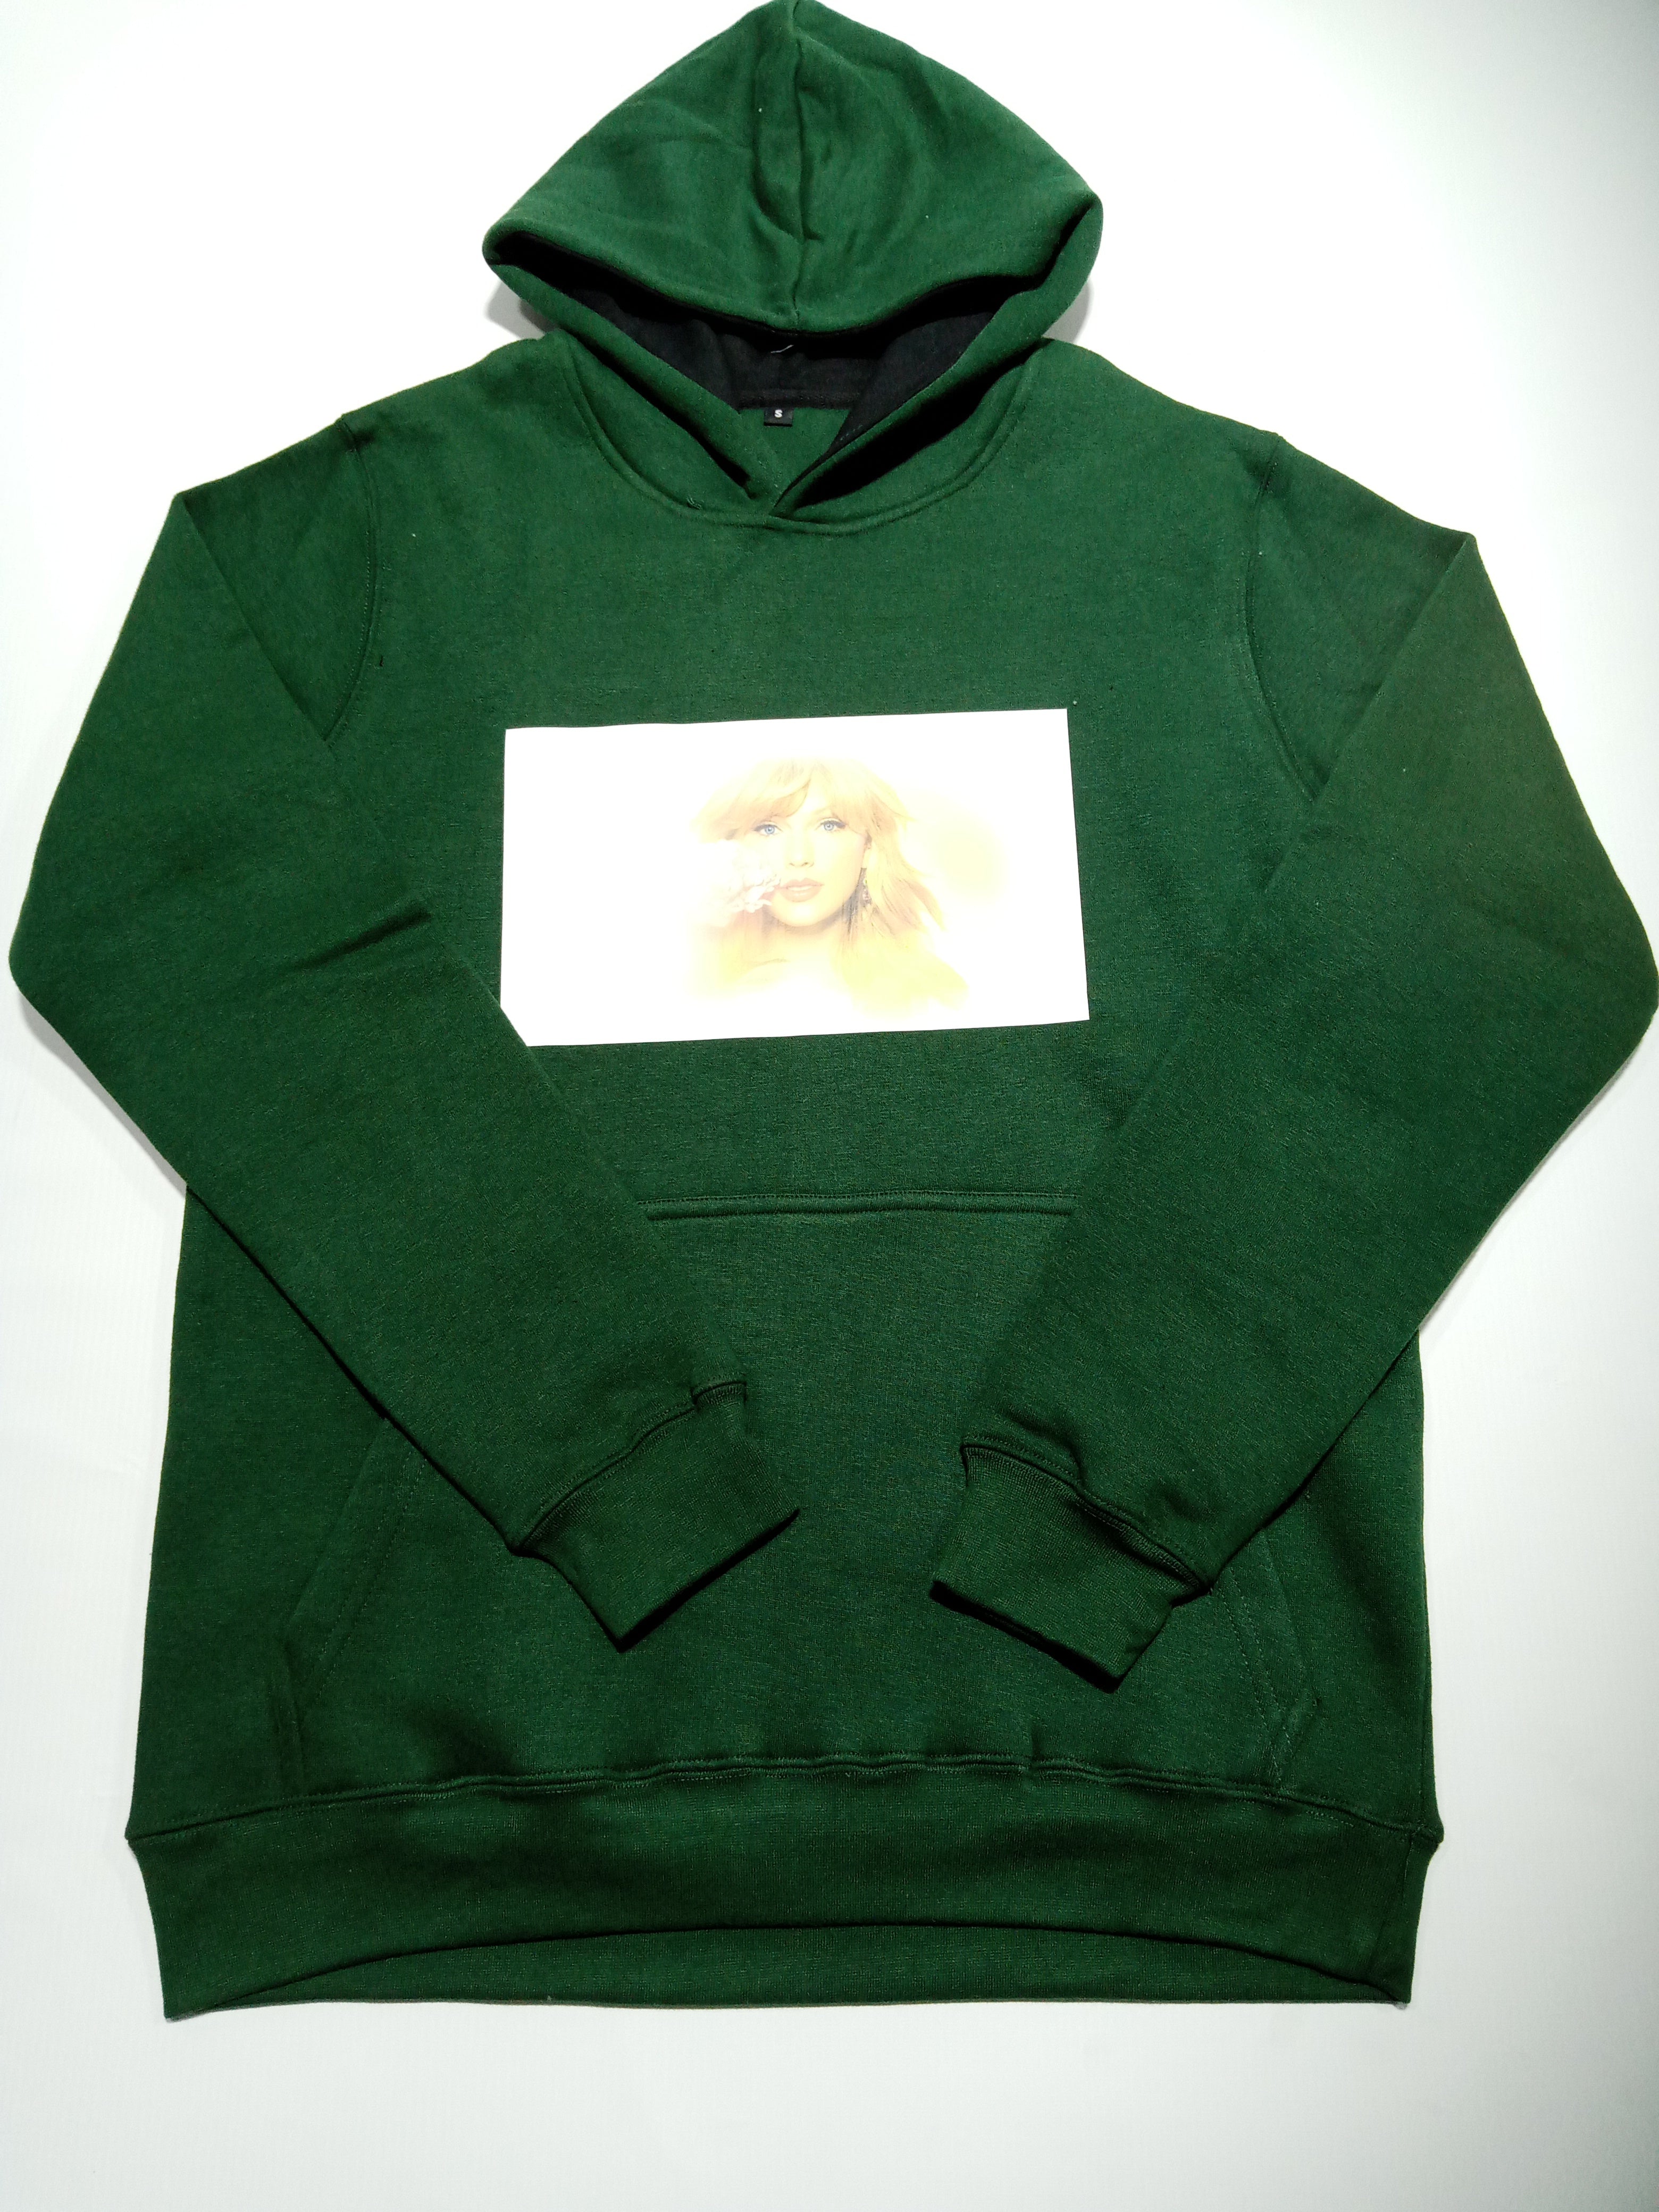 Graphic Printed Green Hoodie Non Zipper